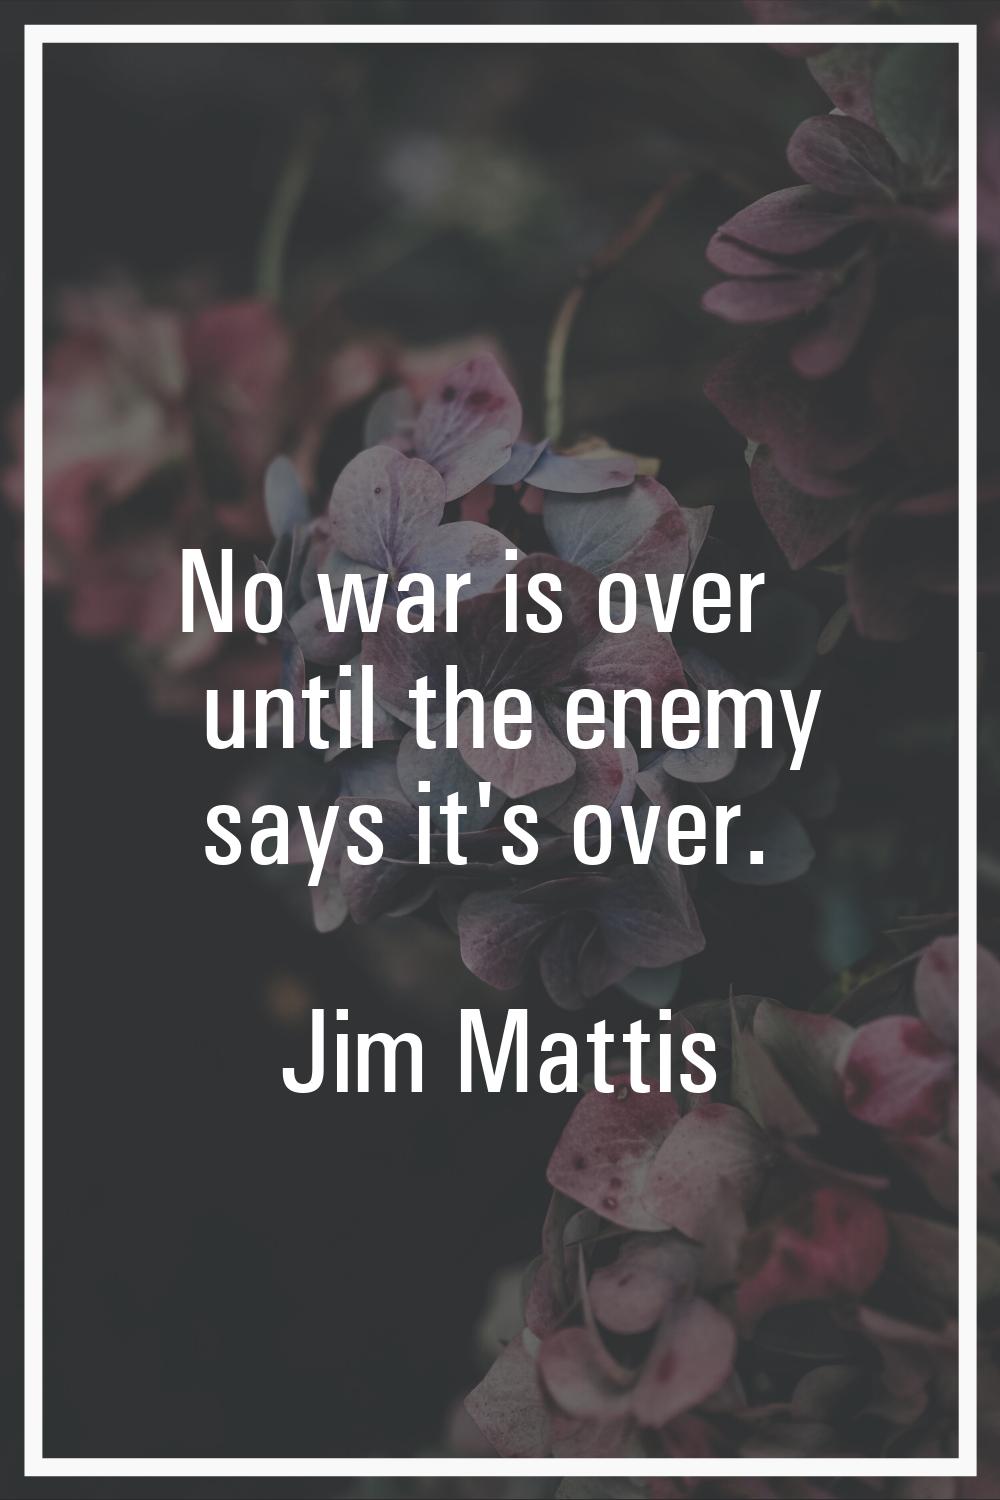 No war is over until the enemy says it's over.